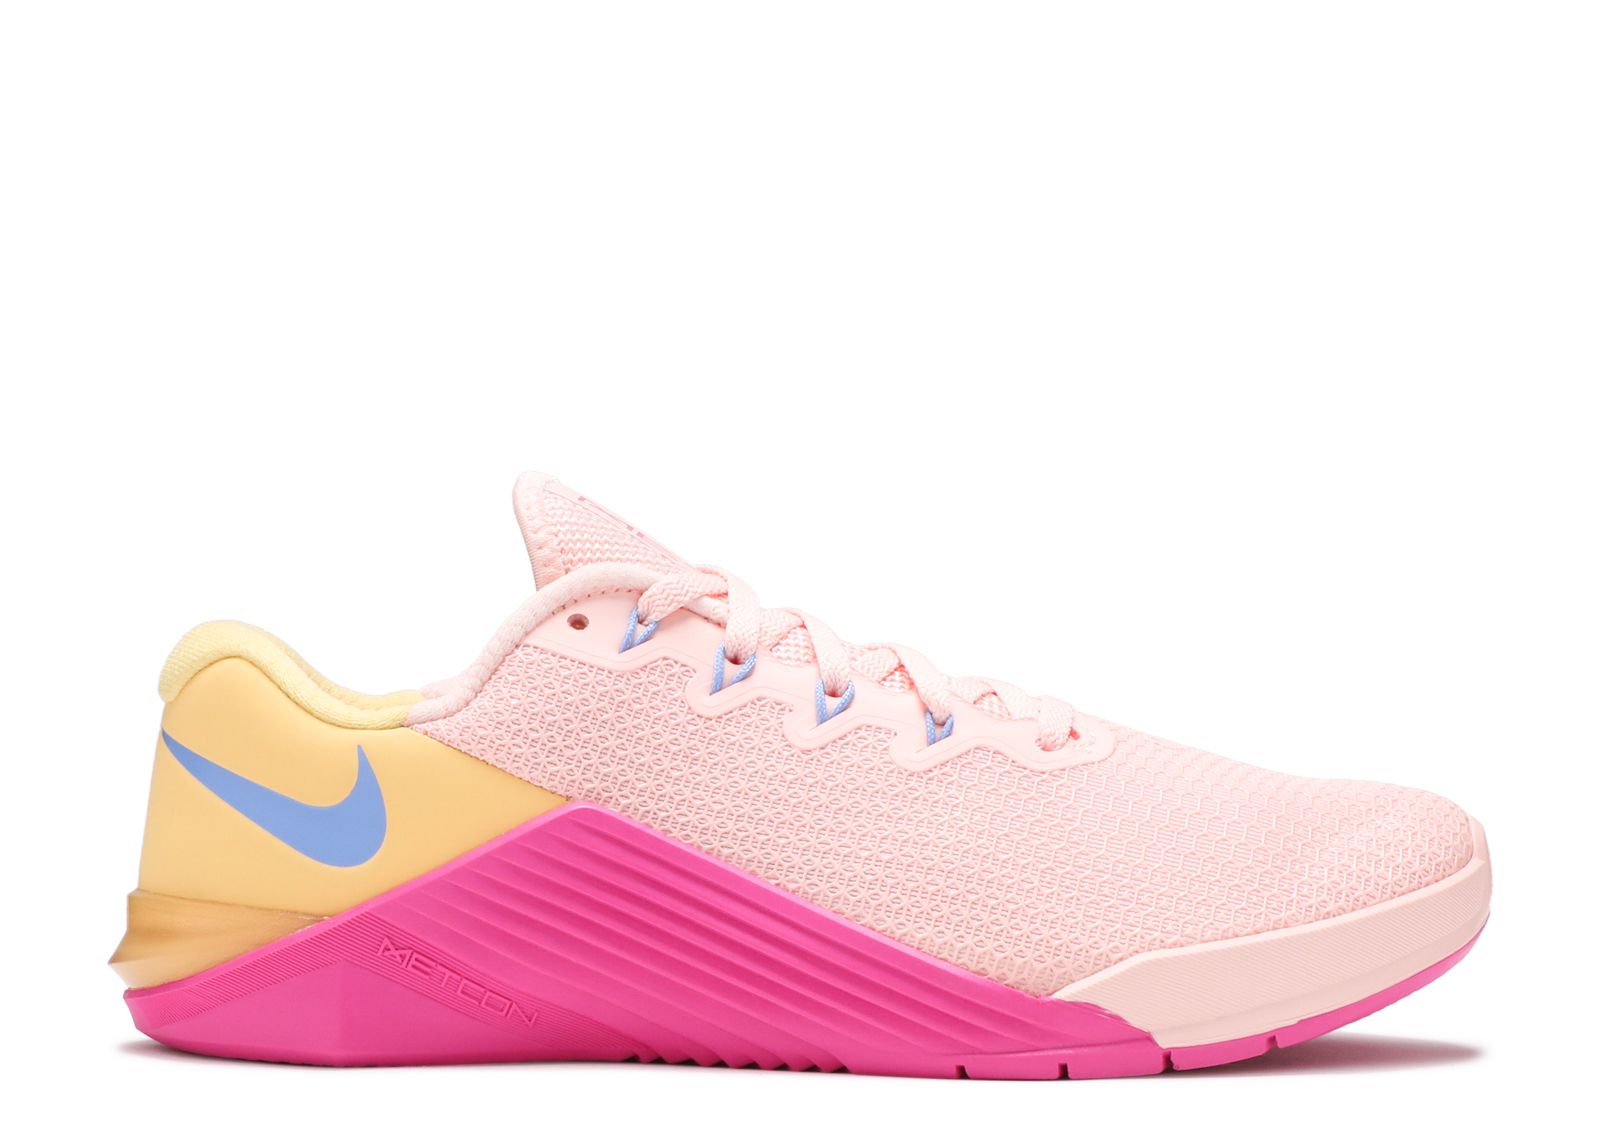 Кроссовки Nike Wmns Metcon 5 'Washed Coral Pink', розовый